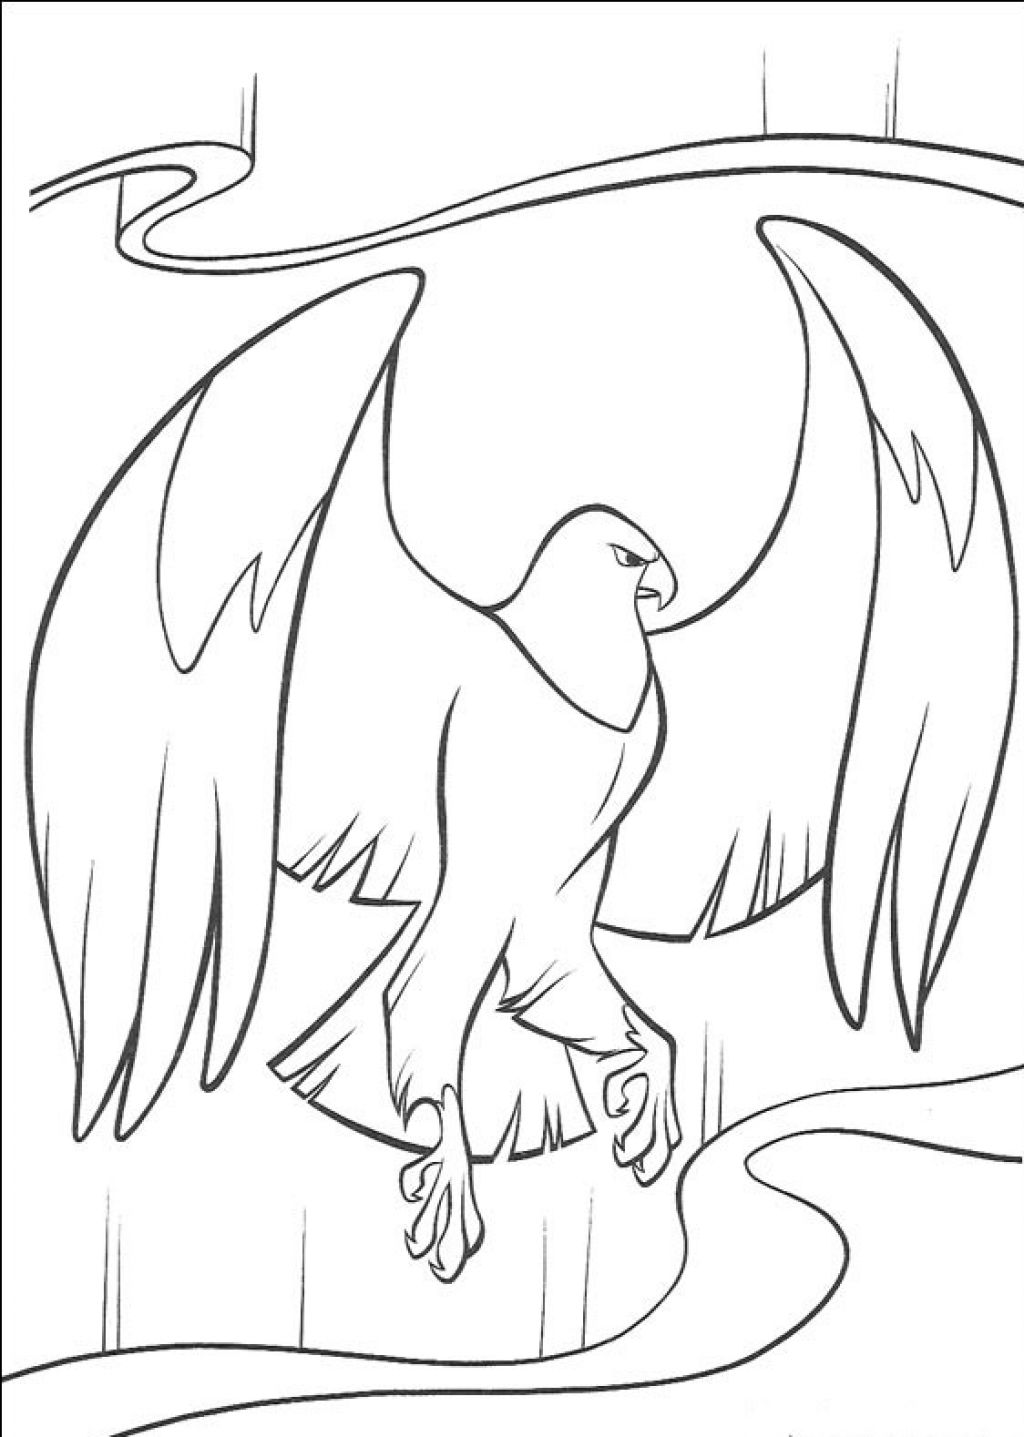  Eagle coloring pages – Bird coloring pages – animals coloring pages – #23